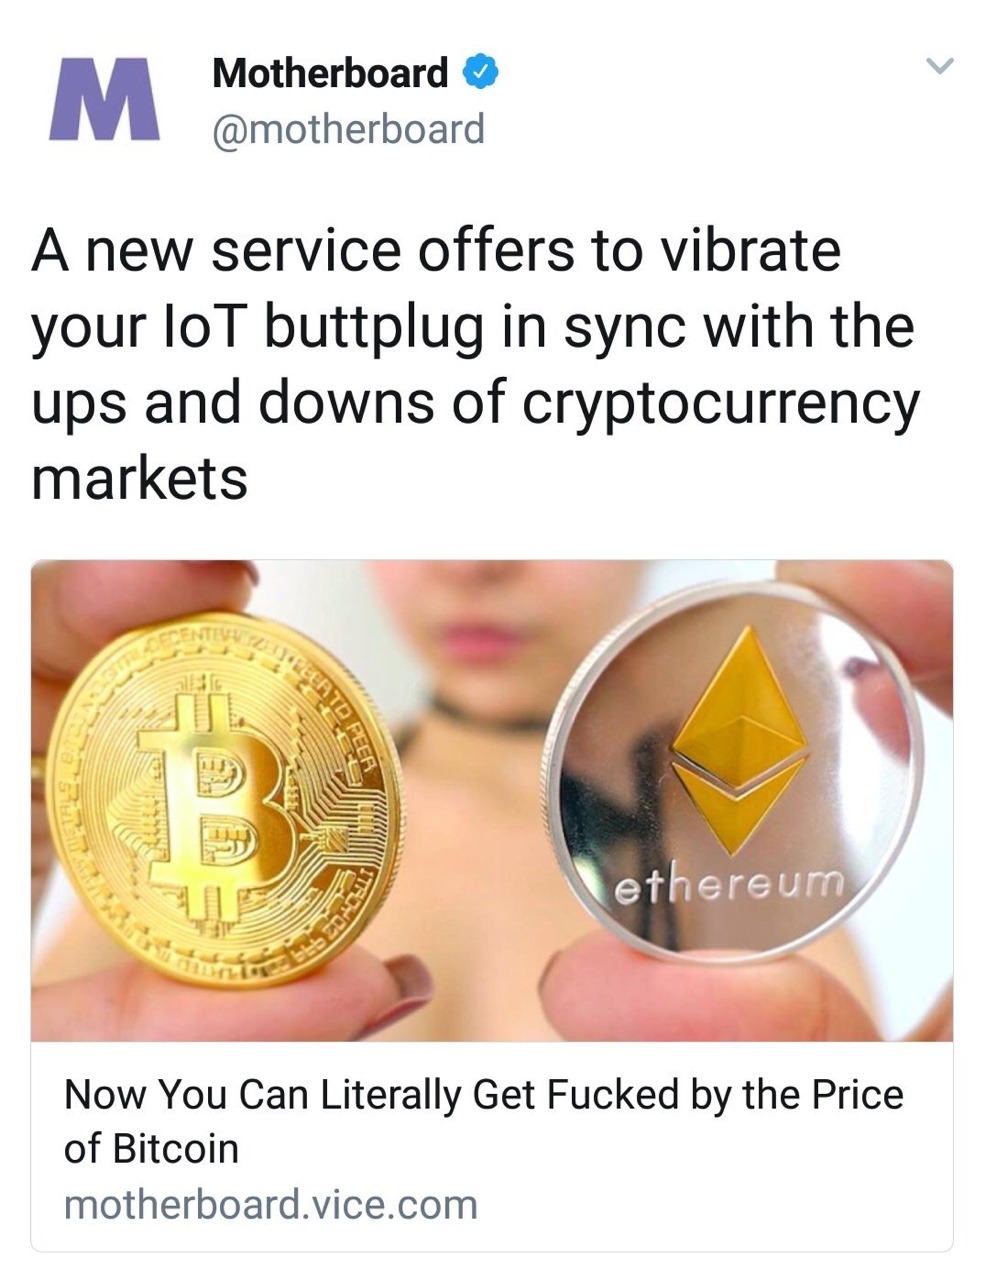 butt plug - Motherboard A new service offers to vibrate your loT buttplug in sync with the ups and downs of cryptocurrency markets Perde ethereum Now You Can Literally Get Fucked by the Price of Bitcoin motherboard.vice.com